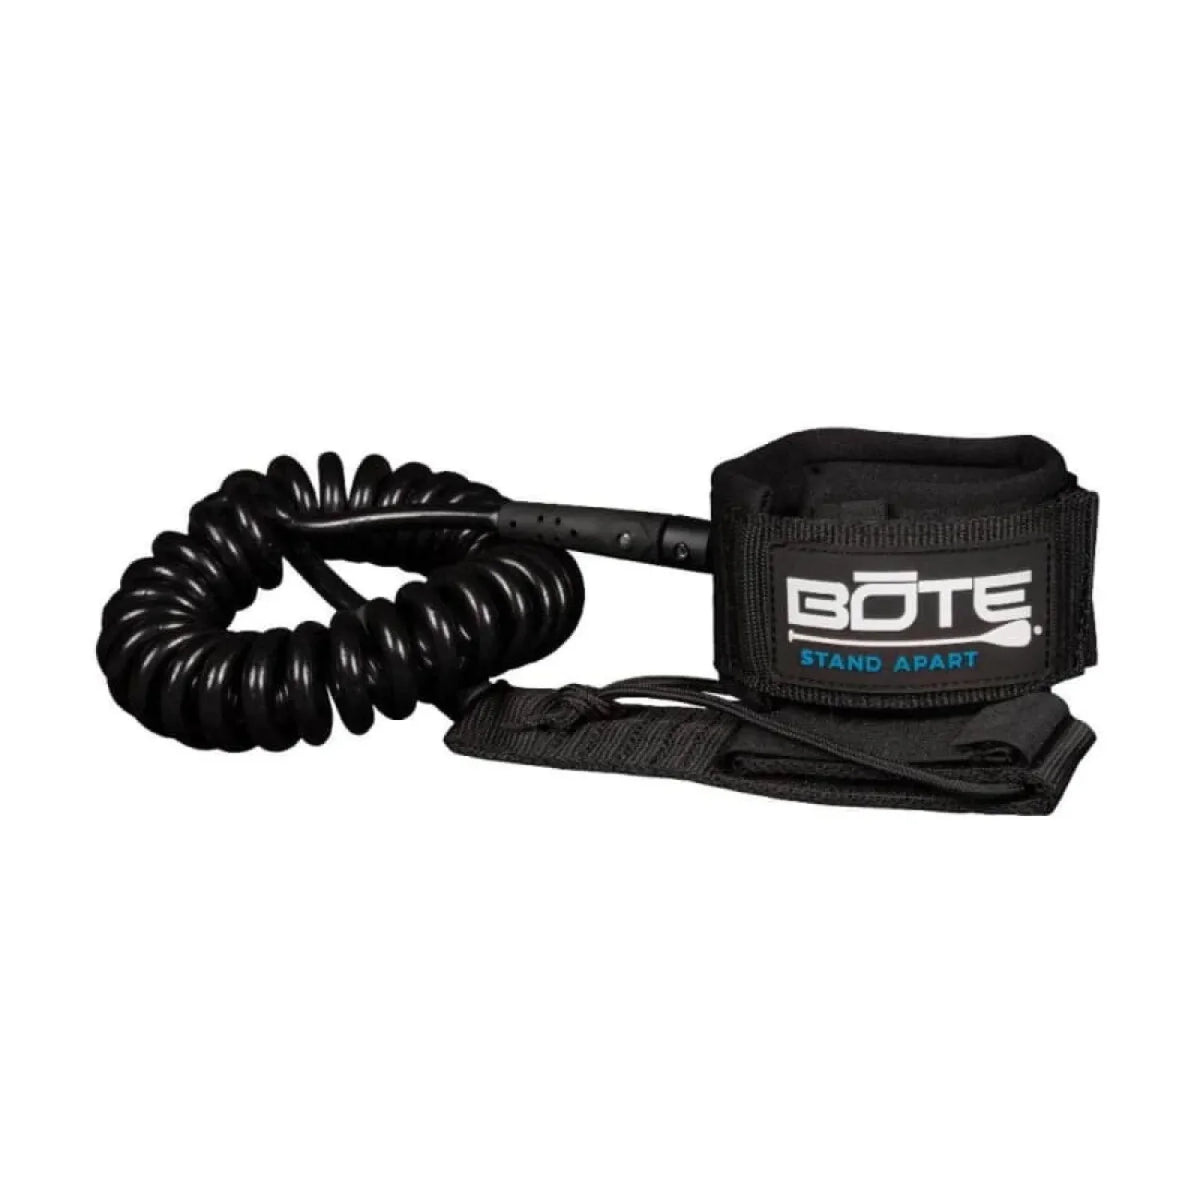 BOTE 14. BOAT ACCESS - WATER ACCESSORIES 10' Coiled Leash